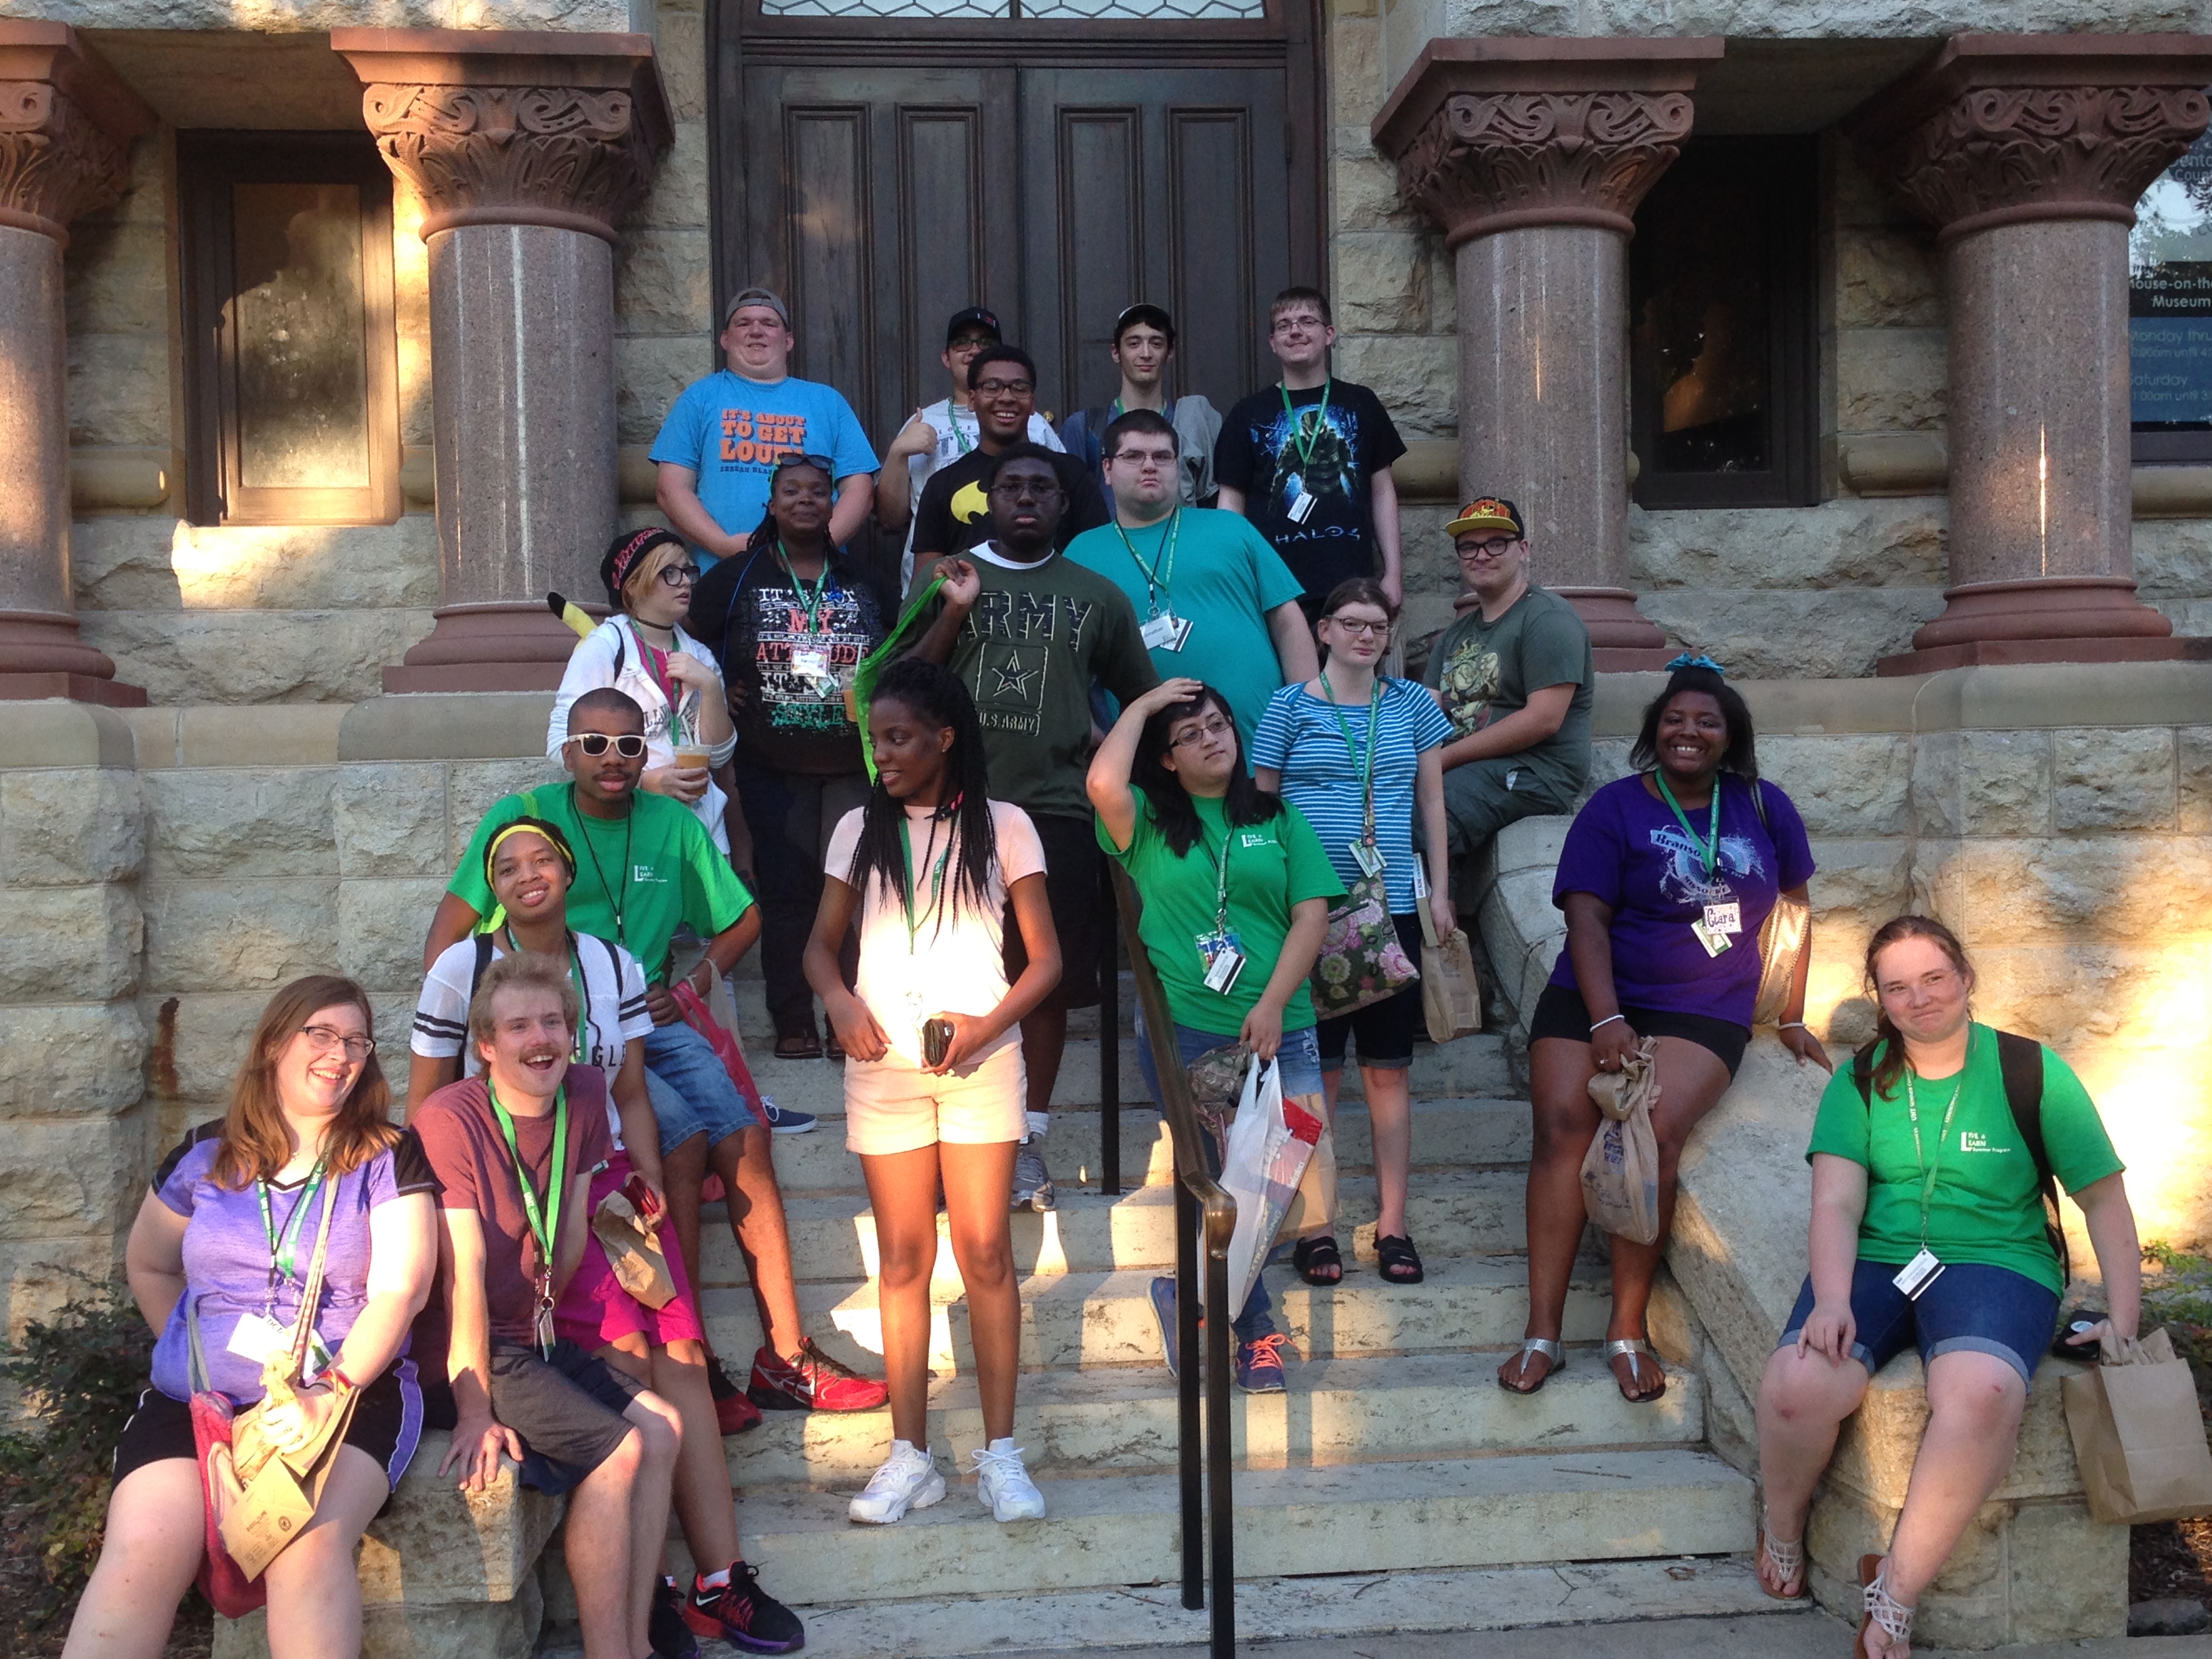 Group of participants on the Denton courthouse steps.